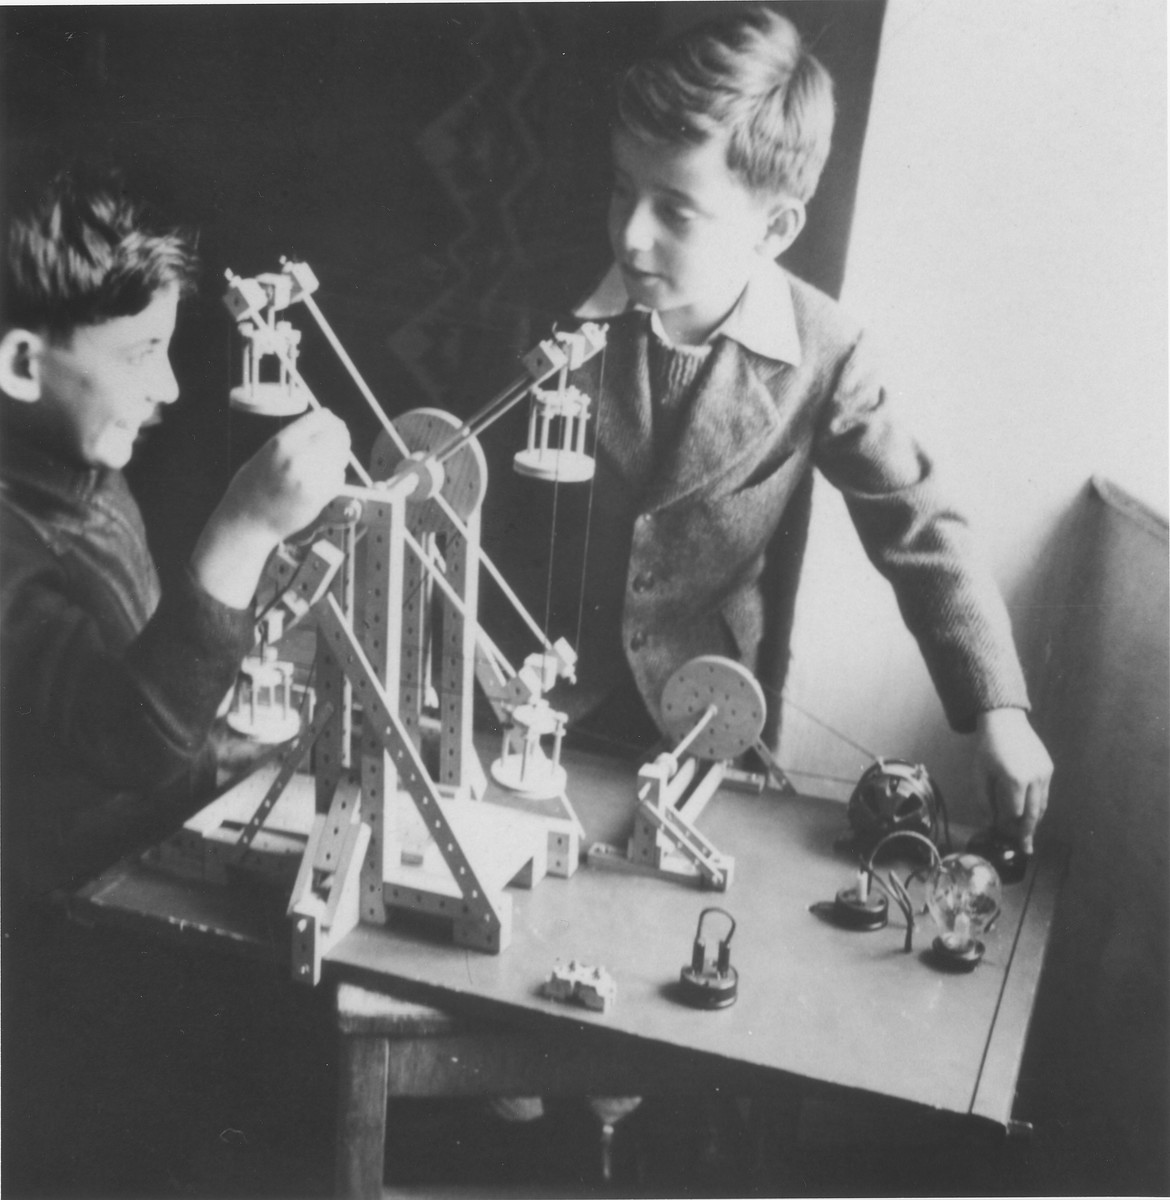 Wolfgang Schaechter (right) and Marcel Brettler (left) play with a mechanical erector set in the Enns displaced persons camp.